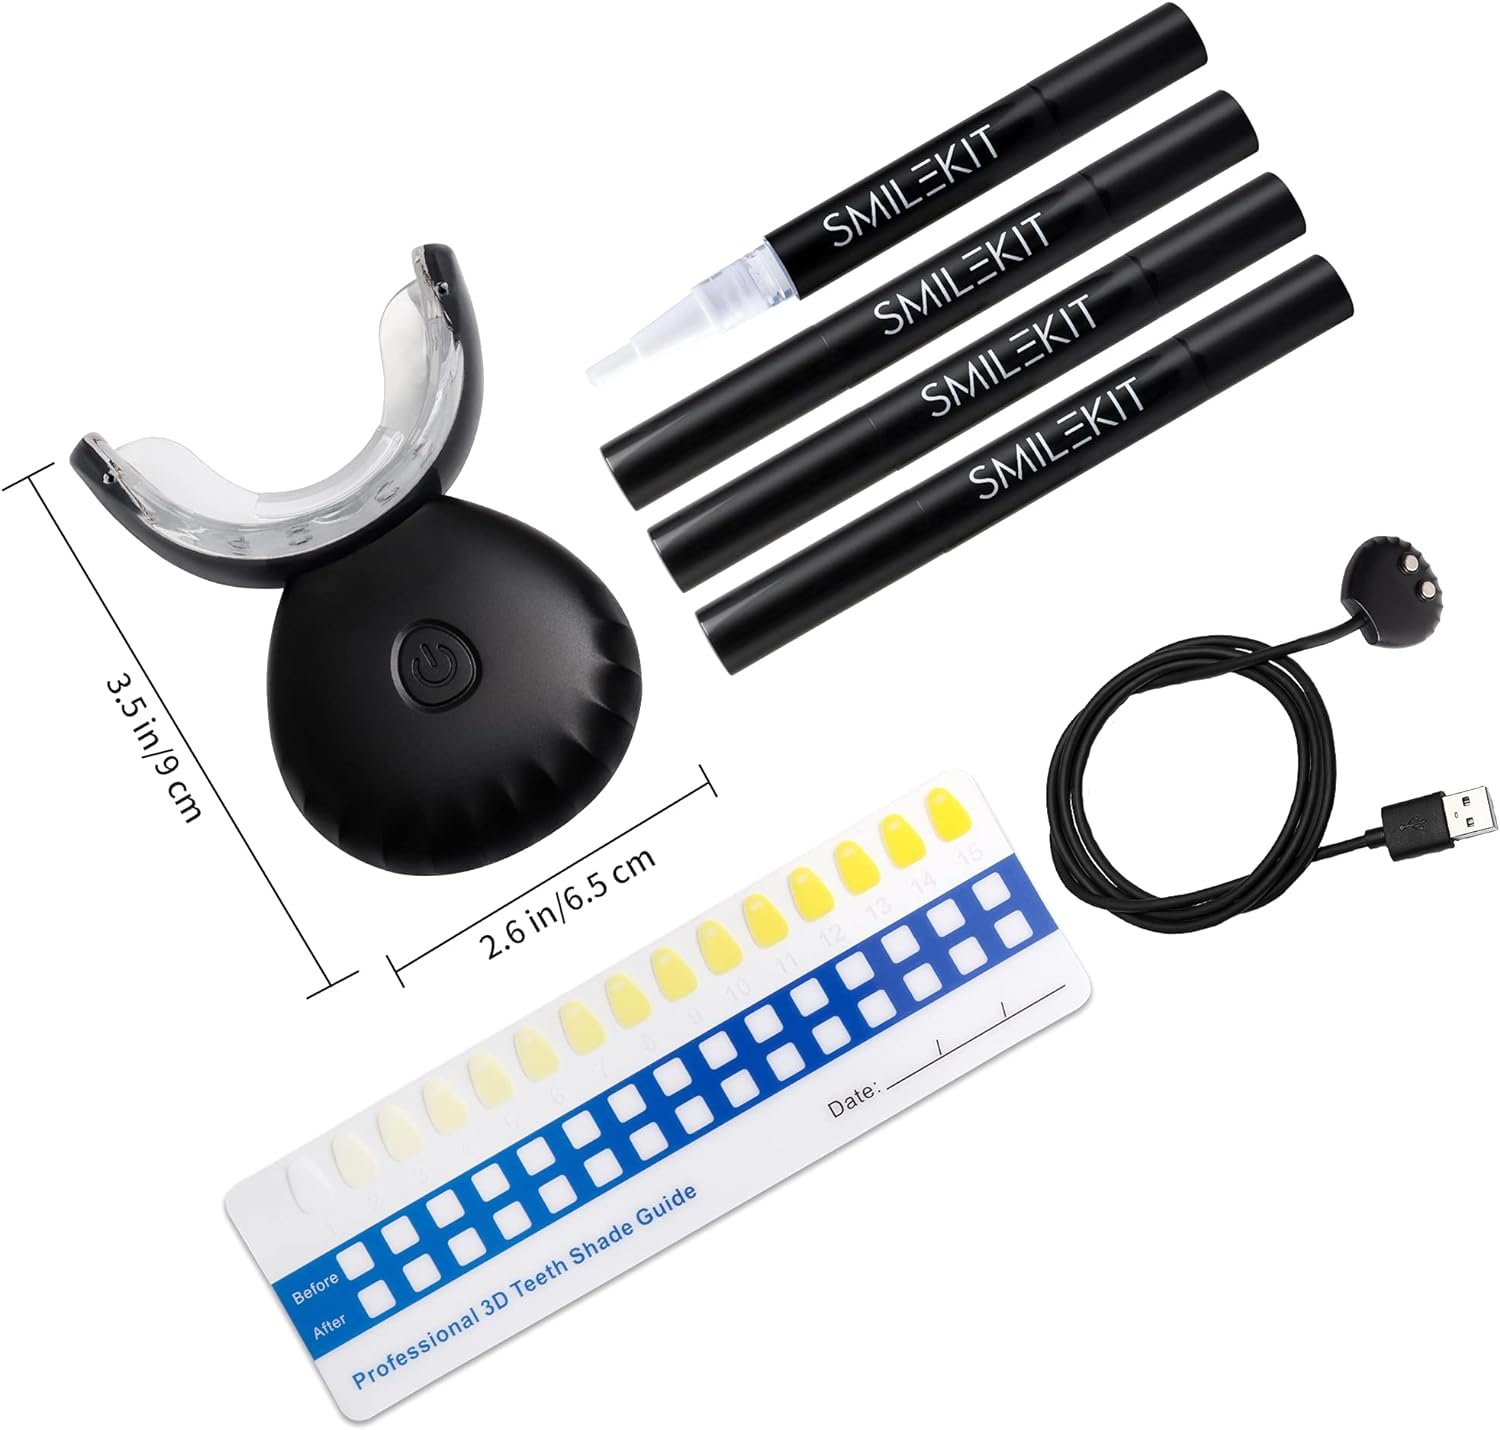 Afranti Home Use Wireless Teeth Whitening Kit with 16-Point LED Blue Lights Accelerator, Natural Whitening Effective Stain Removal Include 4 Teeth Whitening Gel Pens Complimentary Color Card